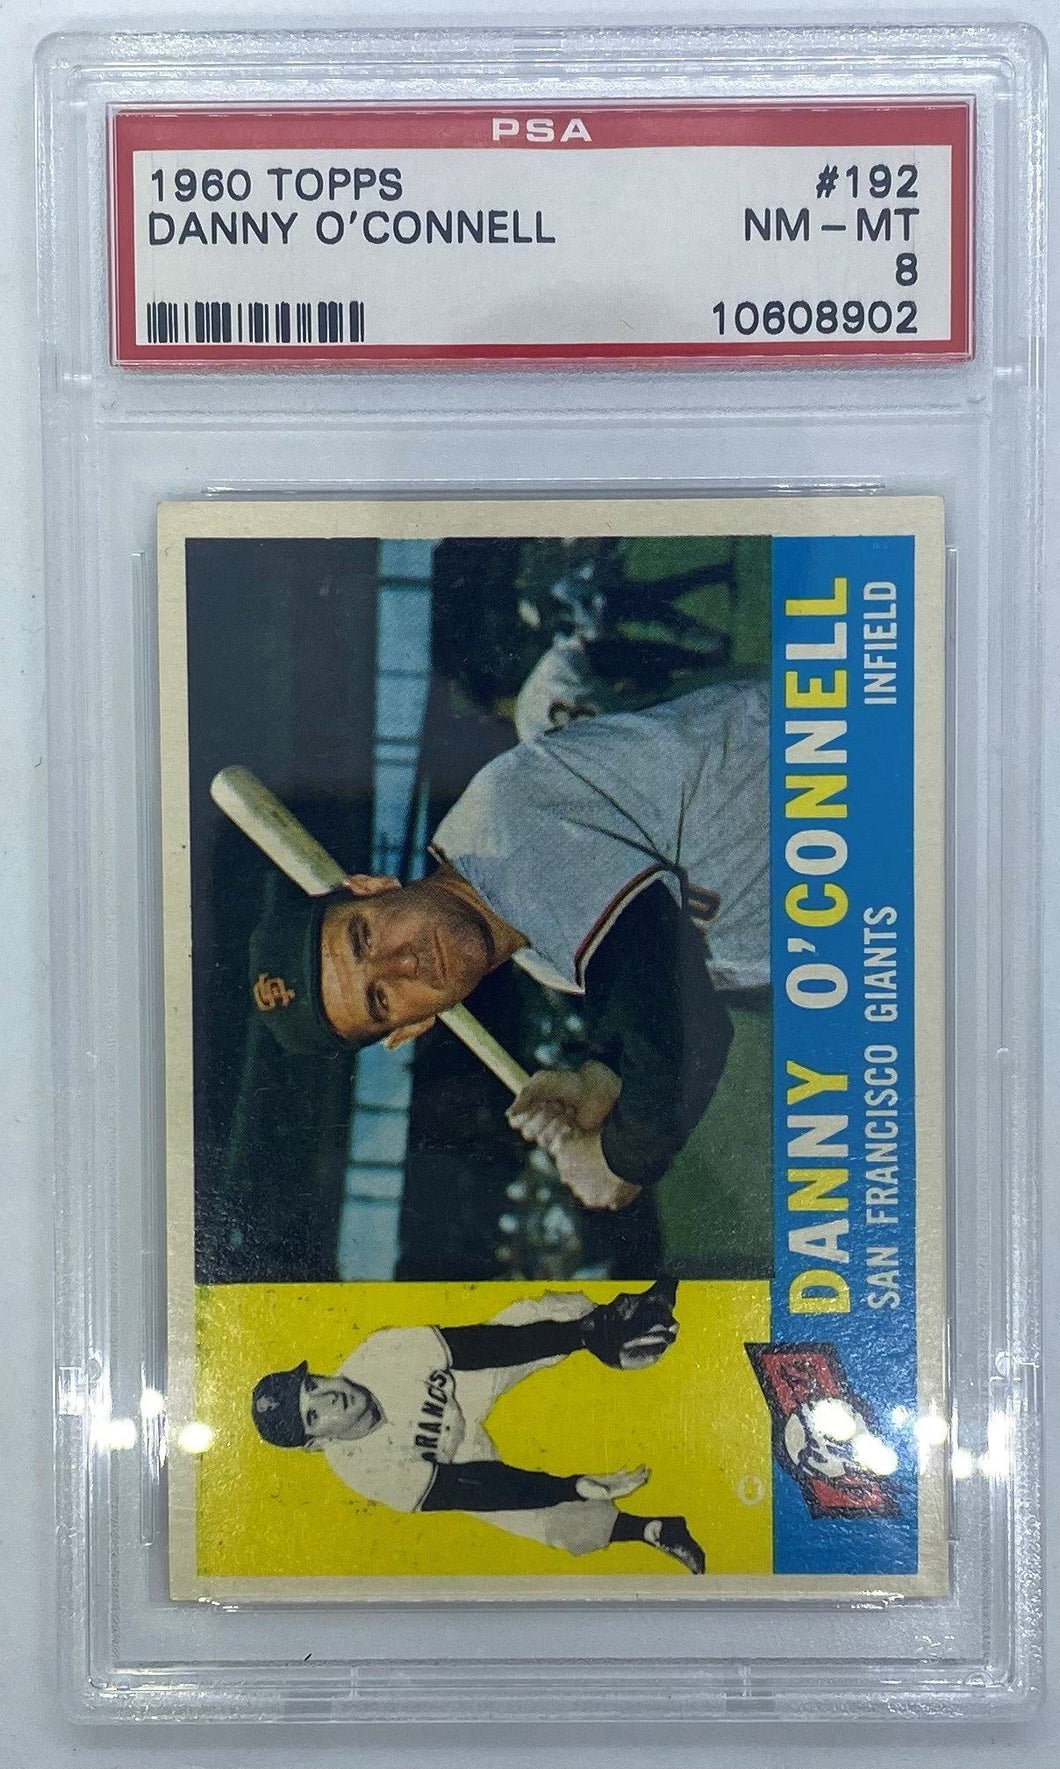 1960 Topps Danny O'Connell #192 PSA NM-MT 8, 10608902